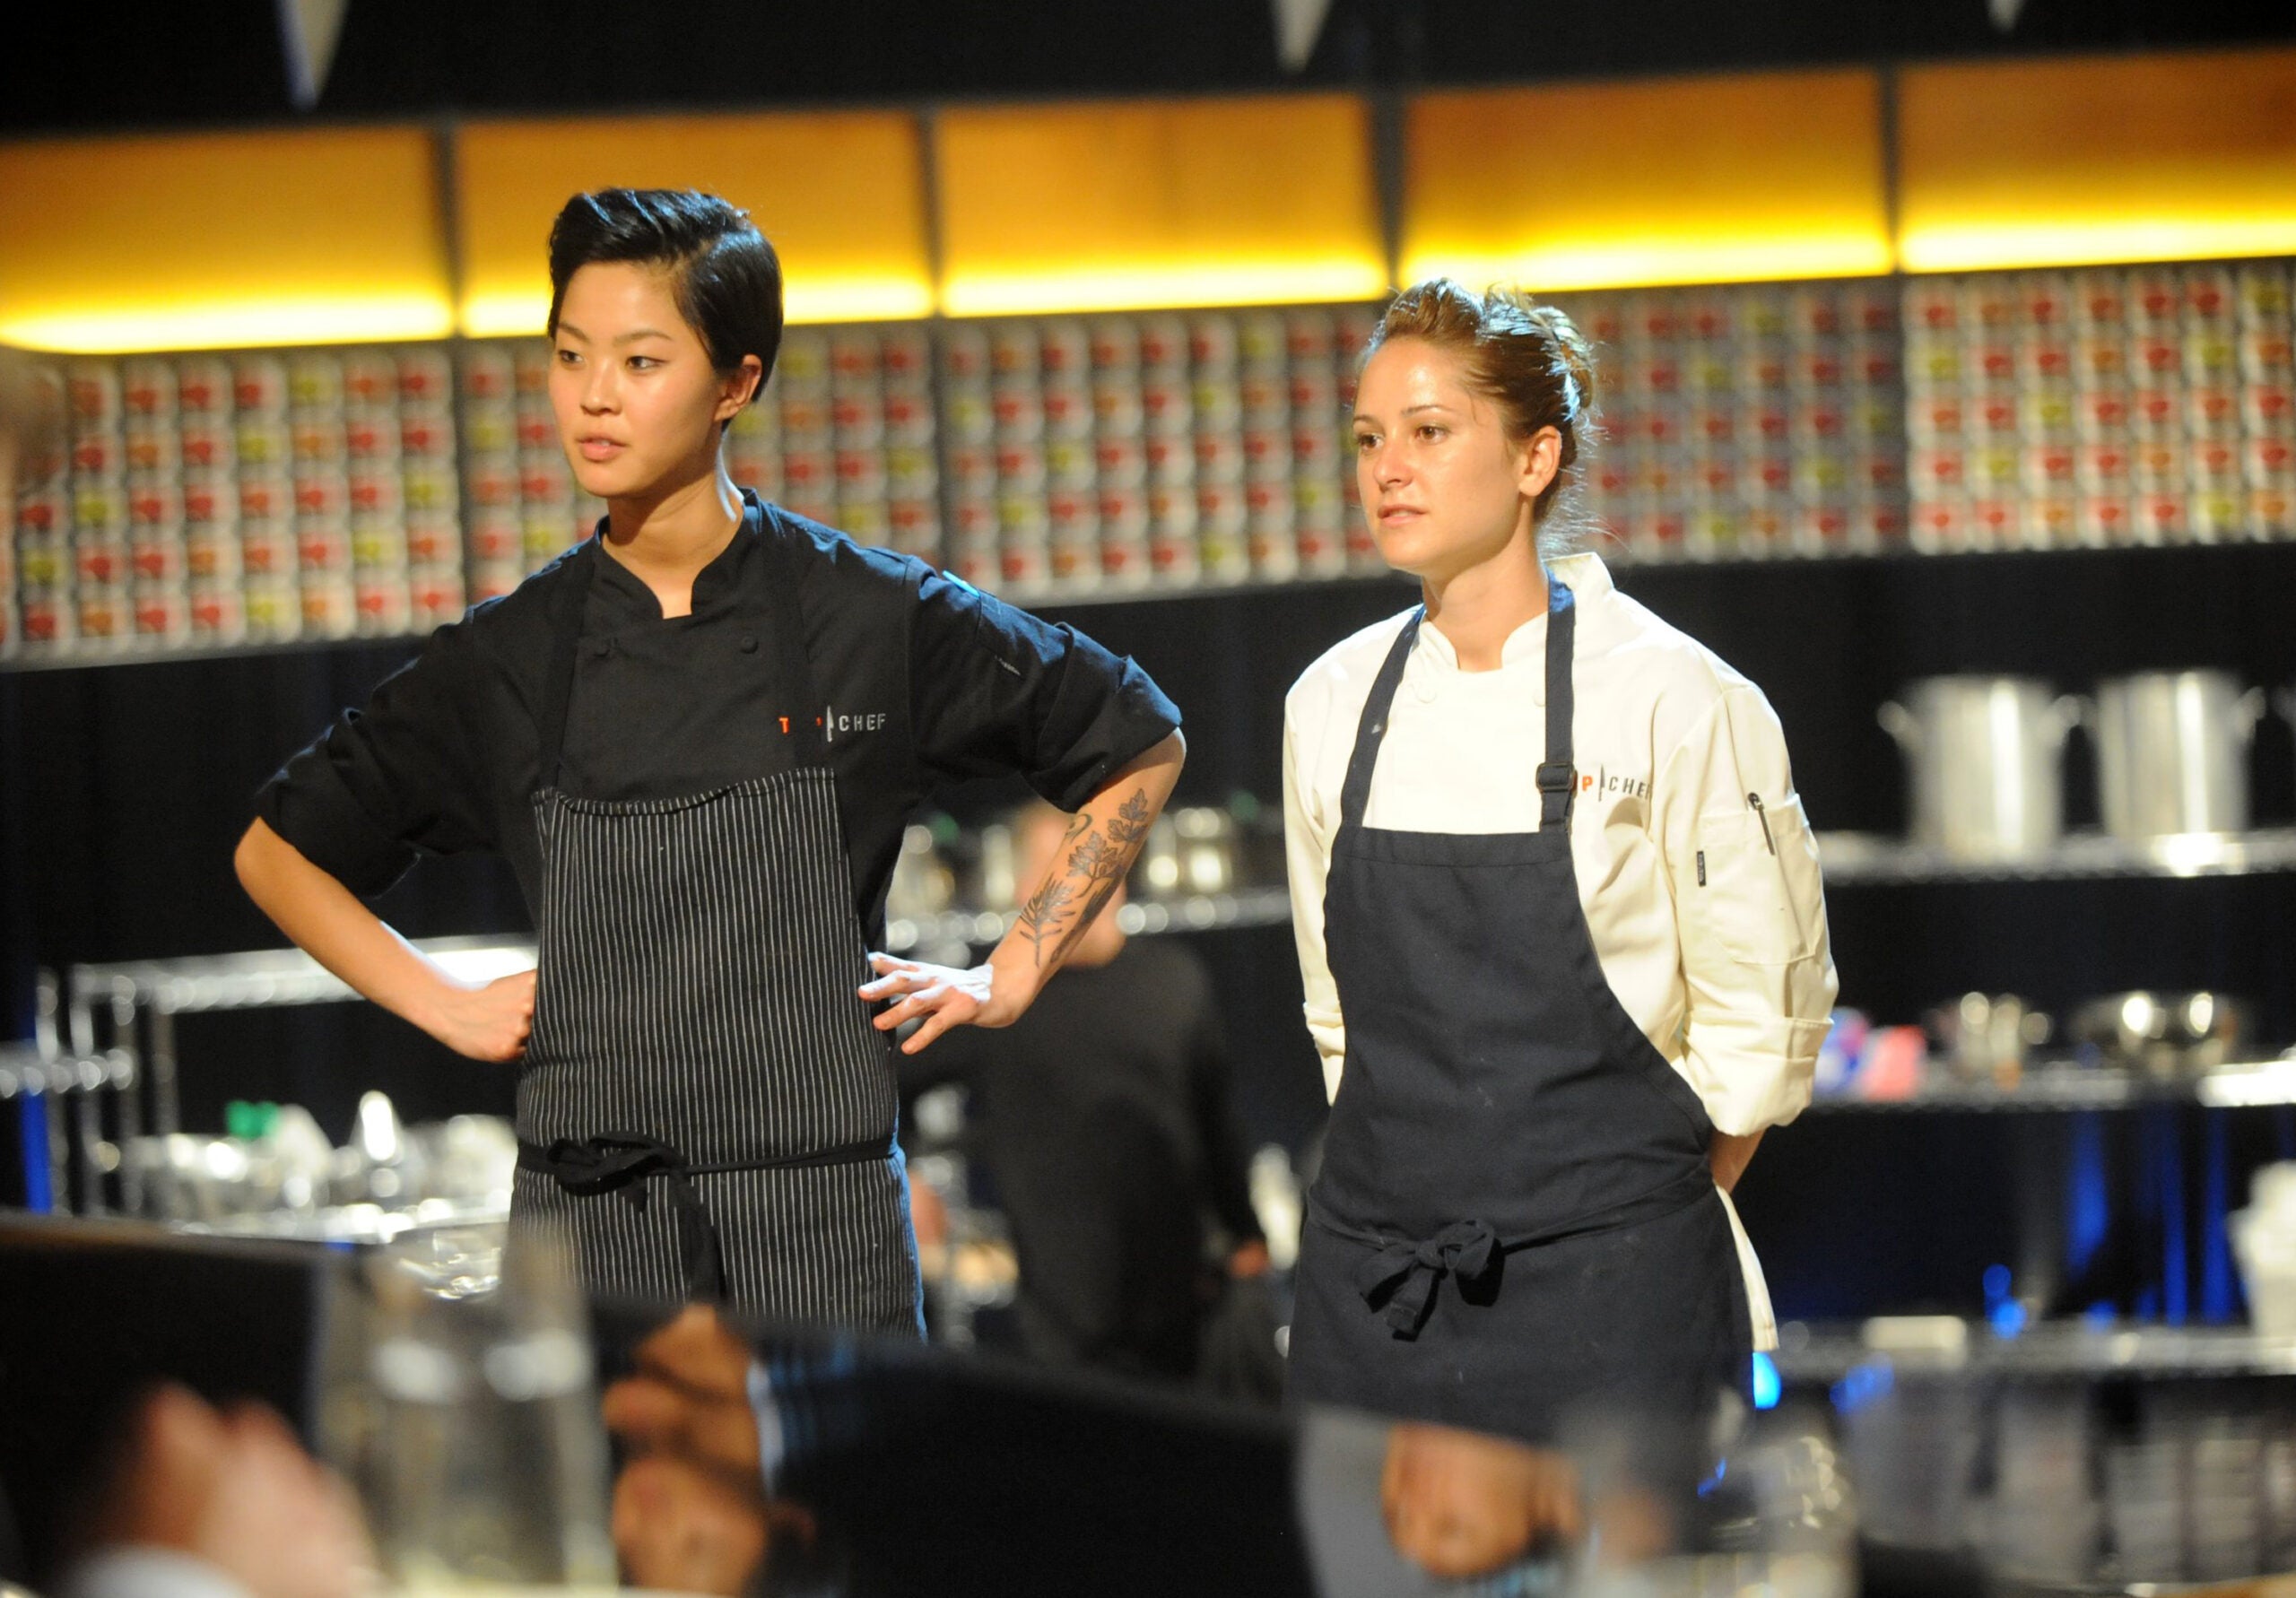 Kristen Kish, left, and Brooke Williamson in a scene from "Top Chef: Seattle."